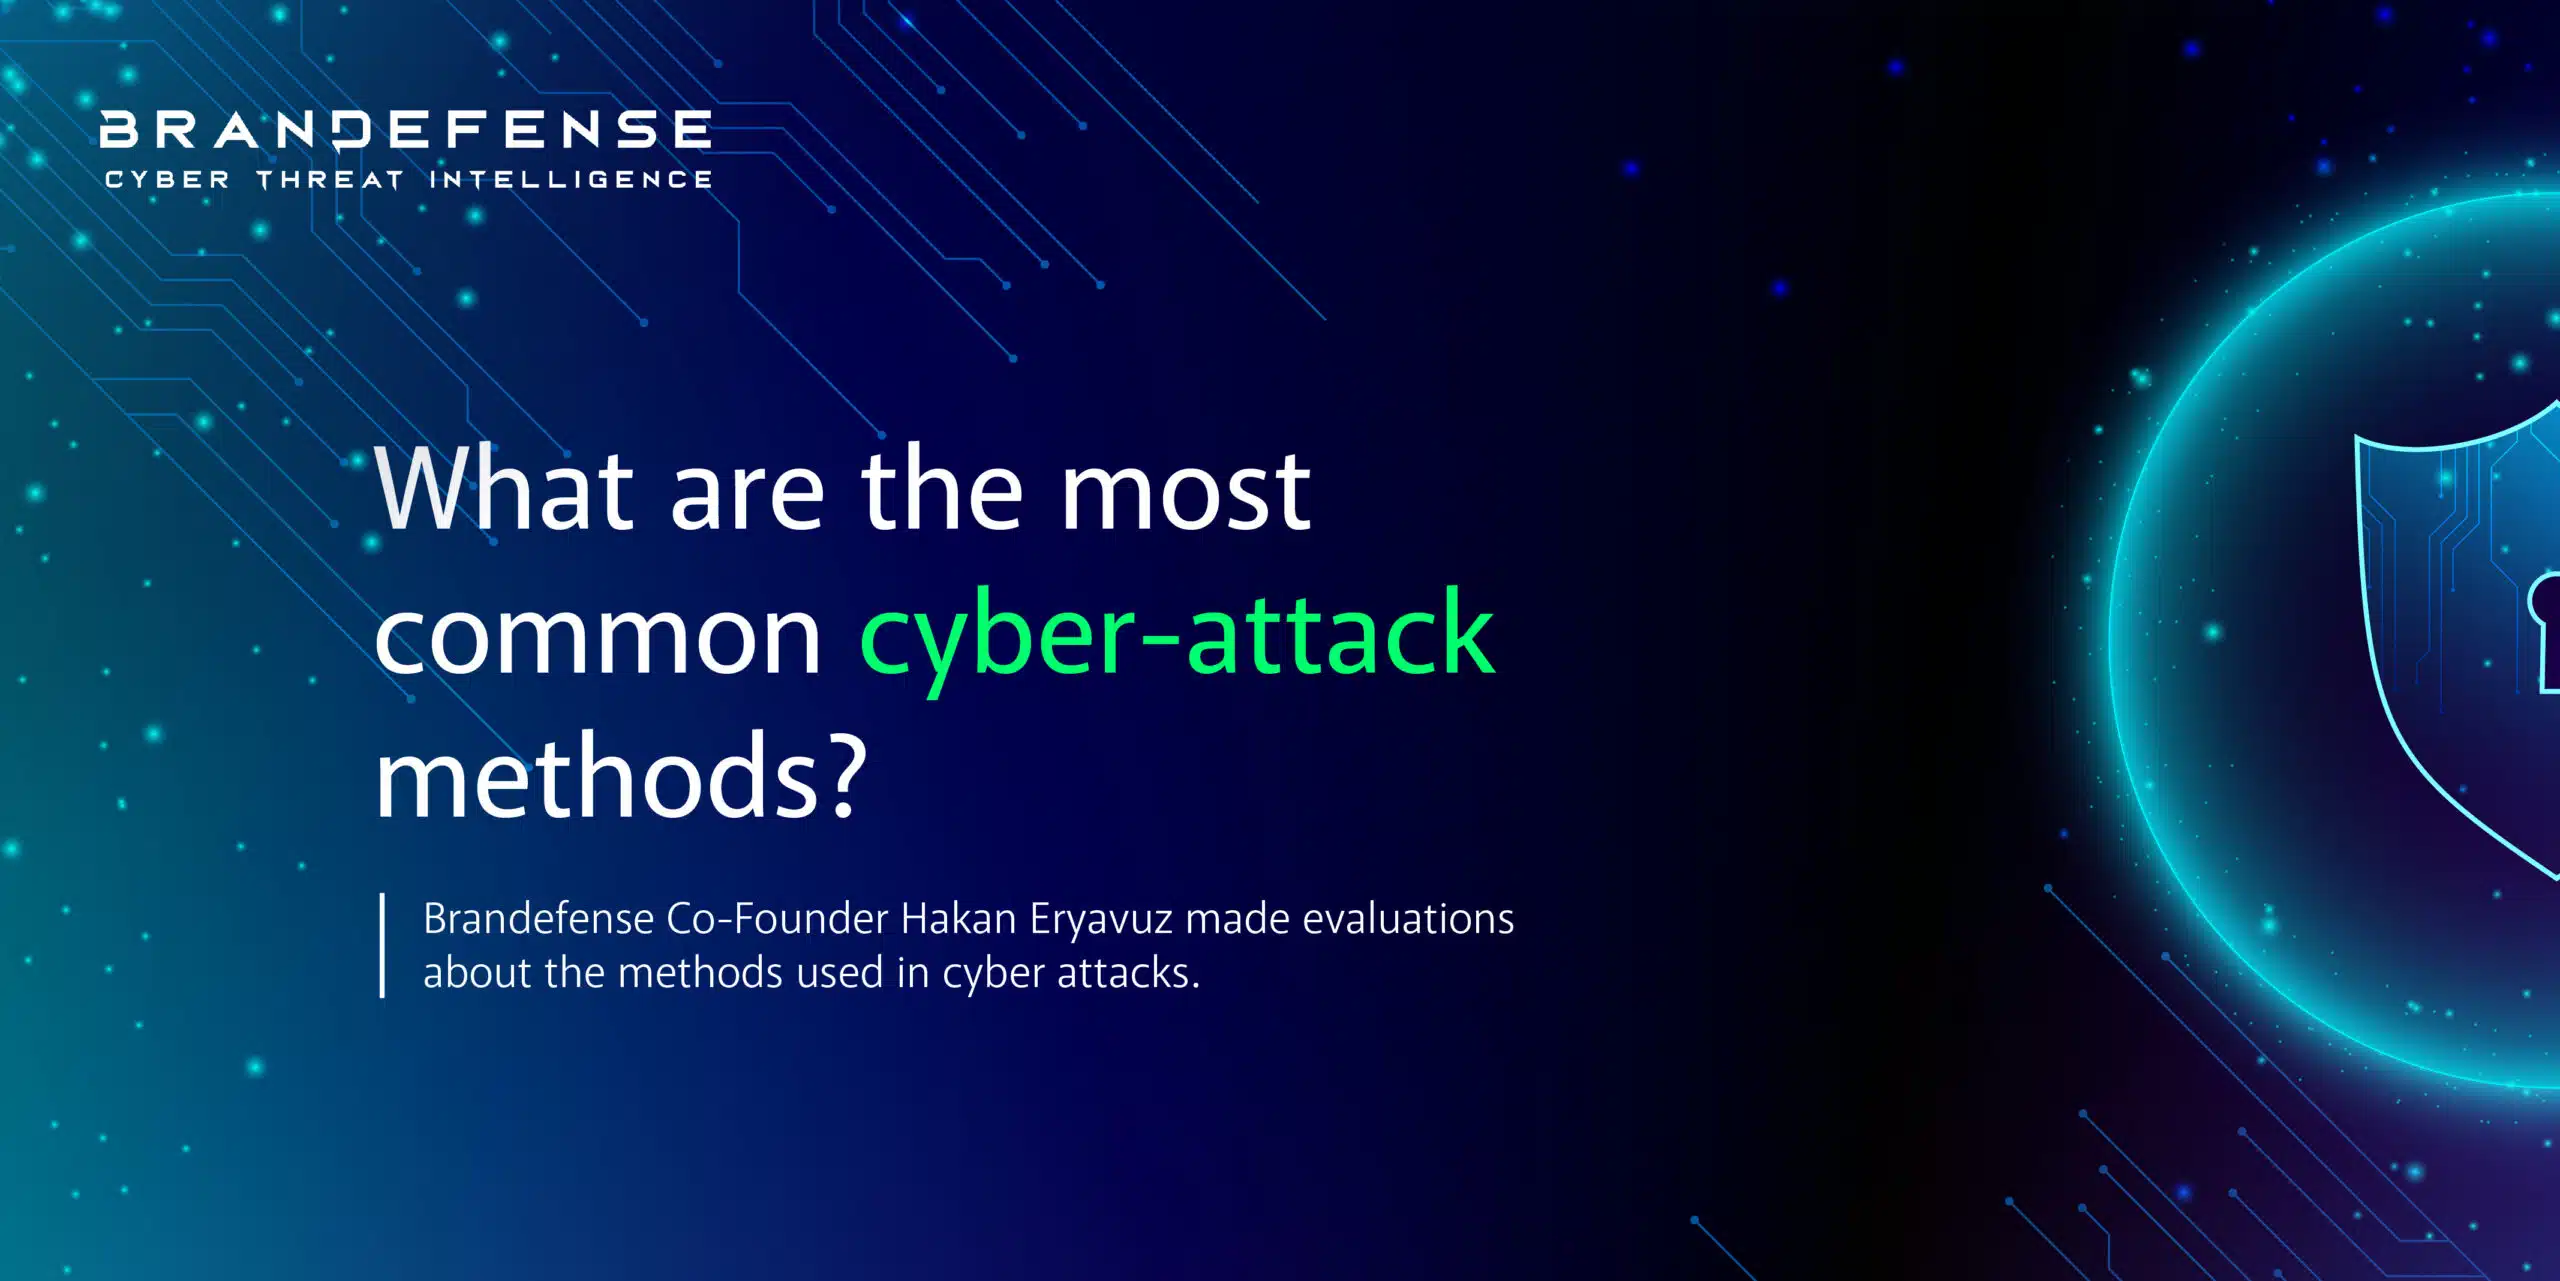 What are the most common cyber-attack methods?